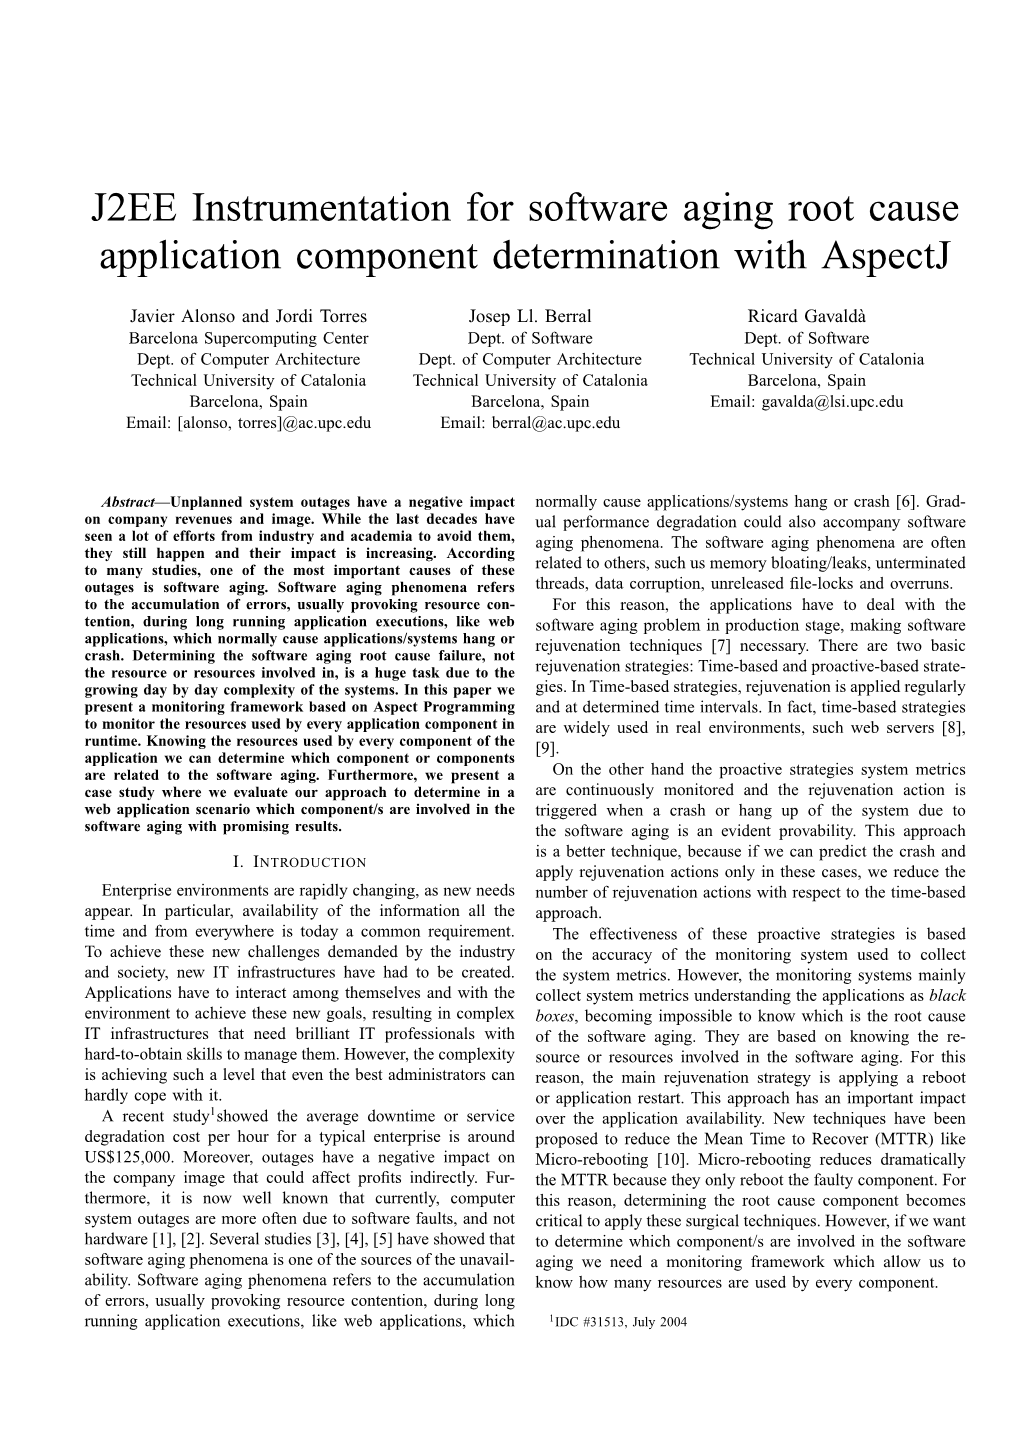 J2EE Instrumentation for Software Aging Root Cause Application Component Determination with Aspectj